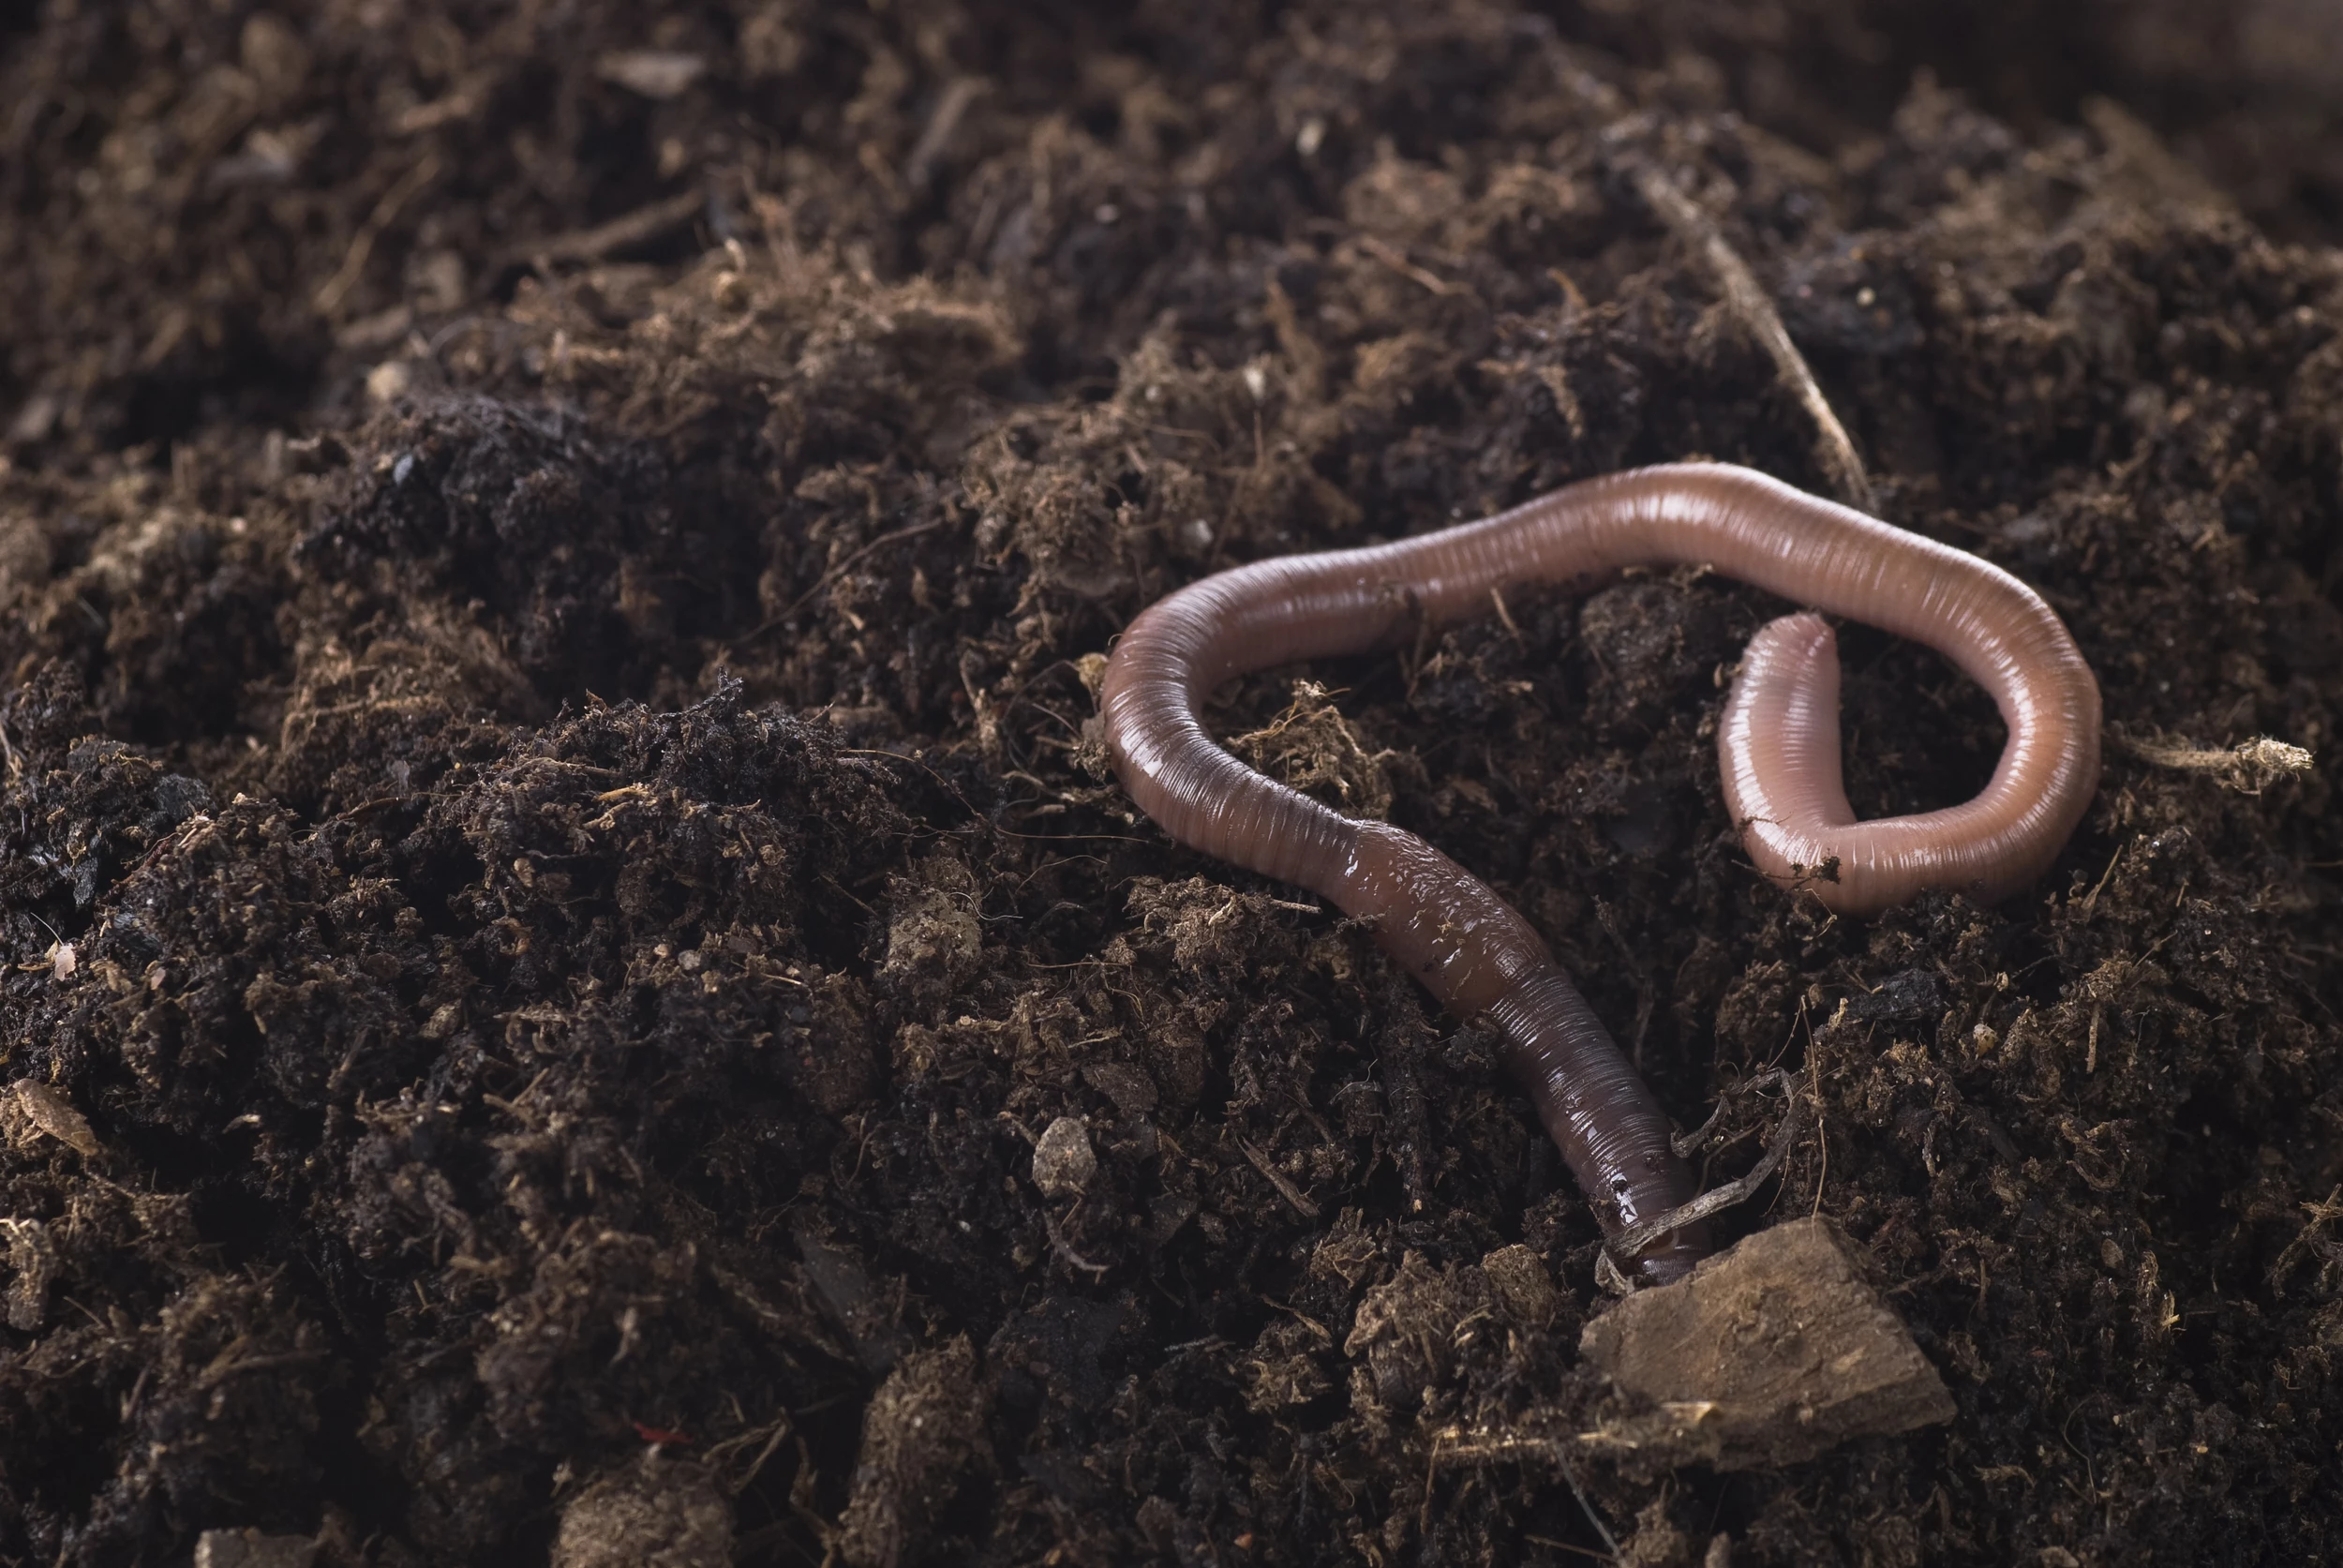 Closeup of an earthworm in the dirt